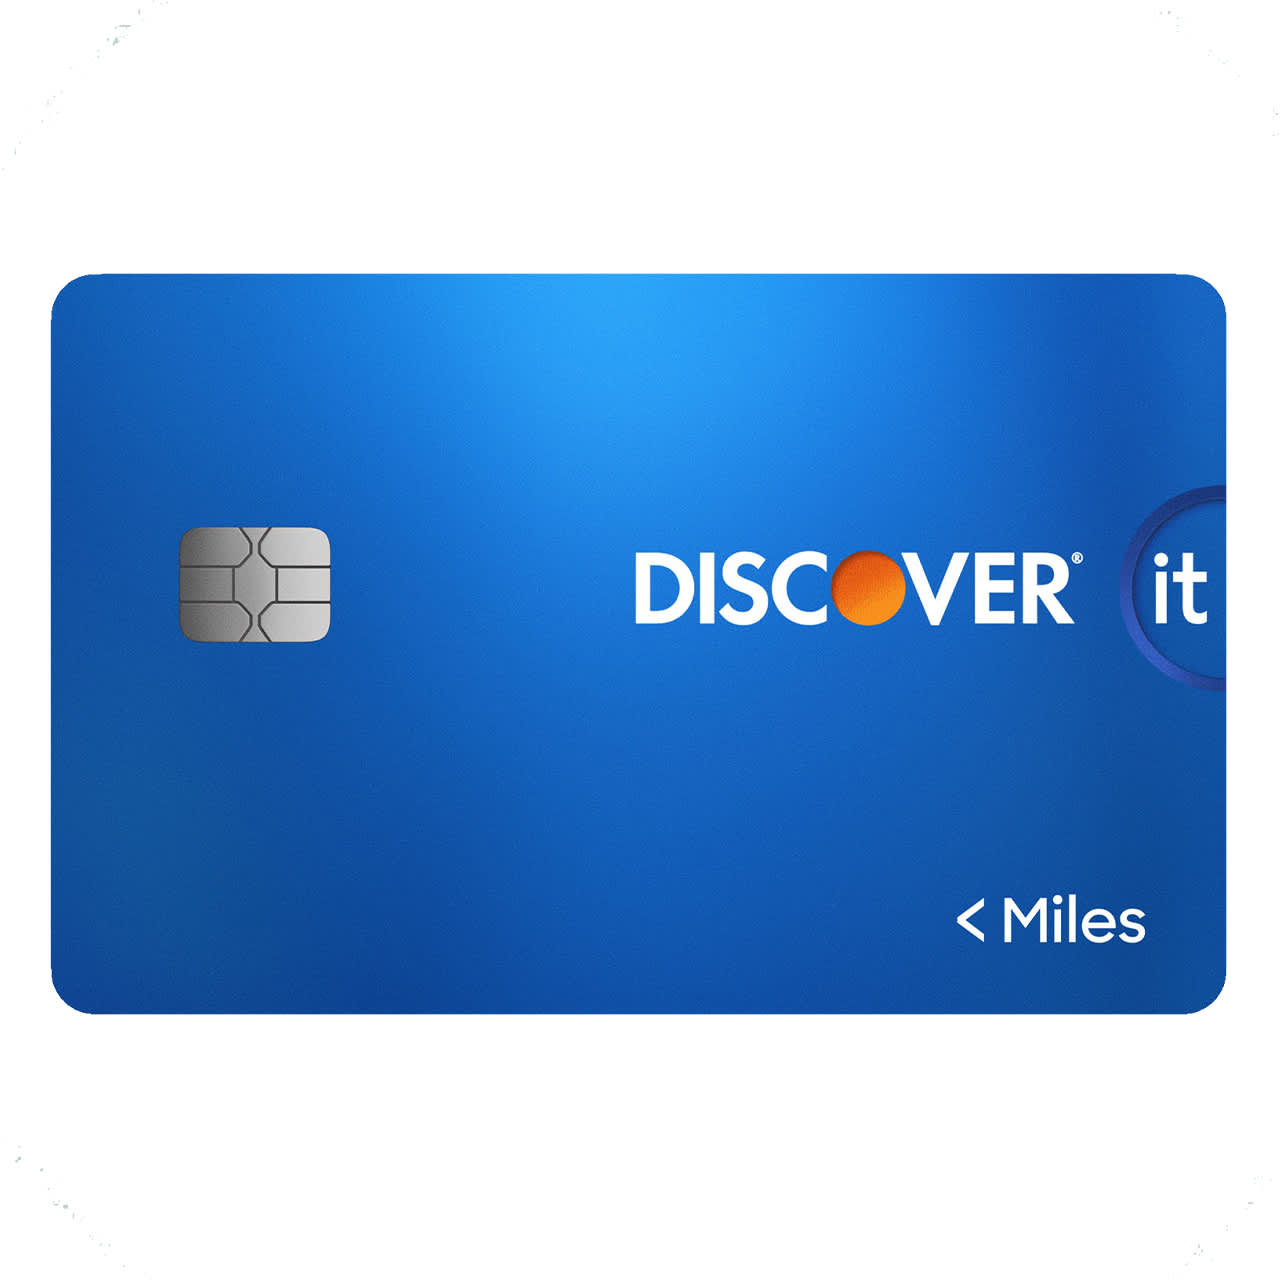 discover it miles travel insurance